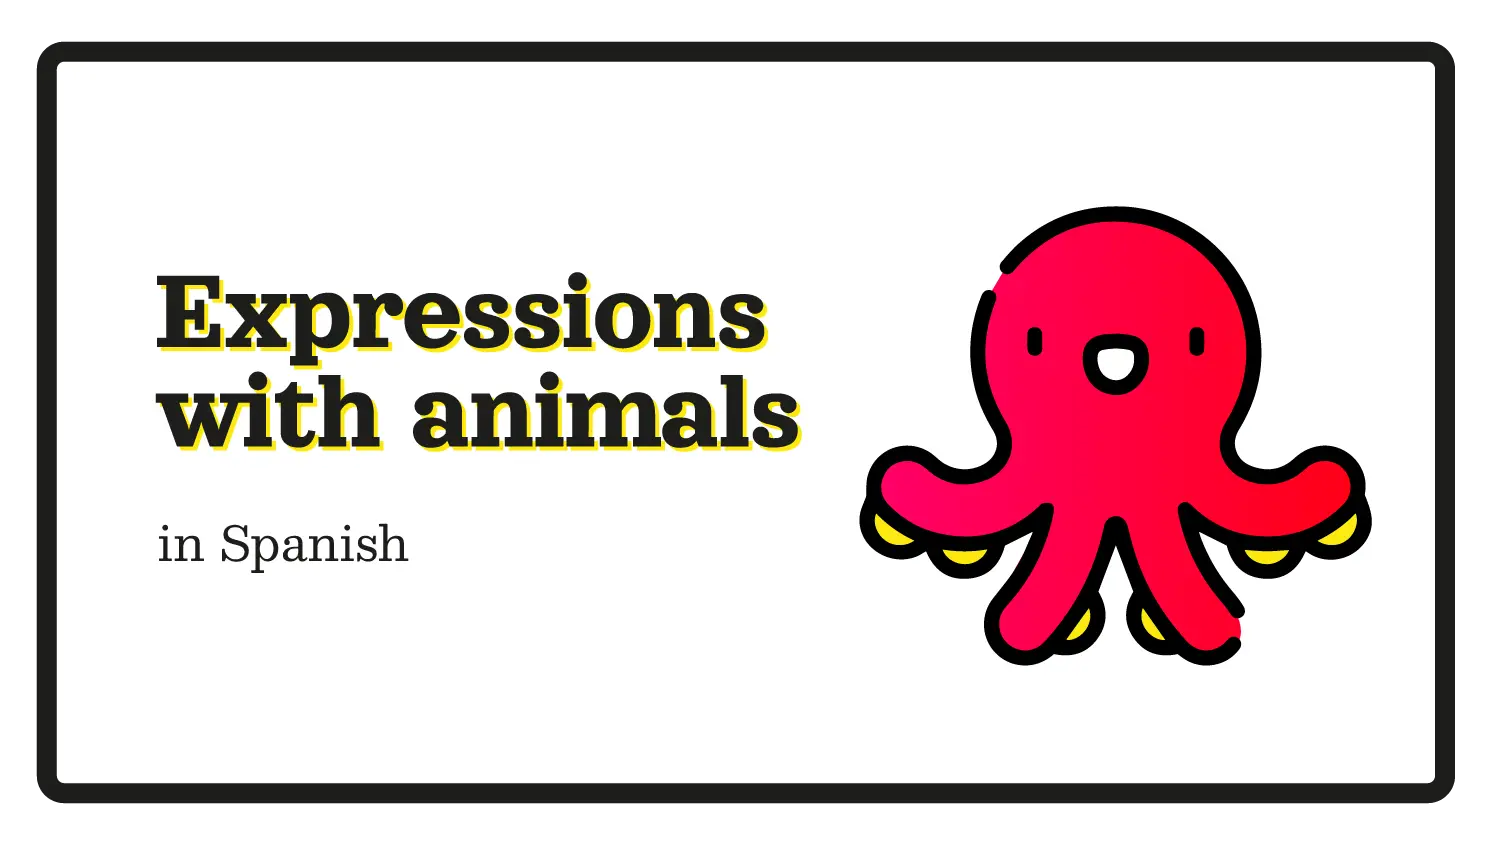 Spanish expressions with animals